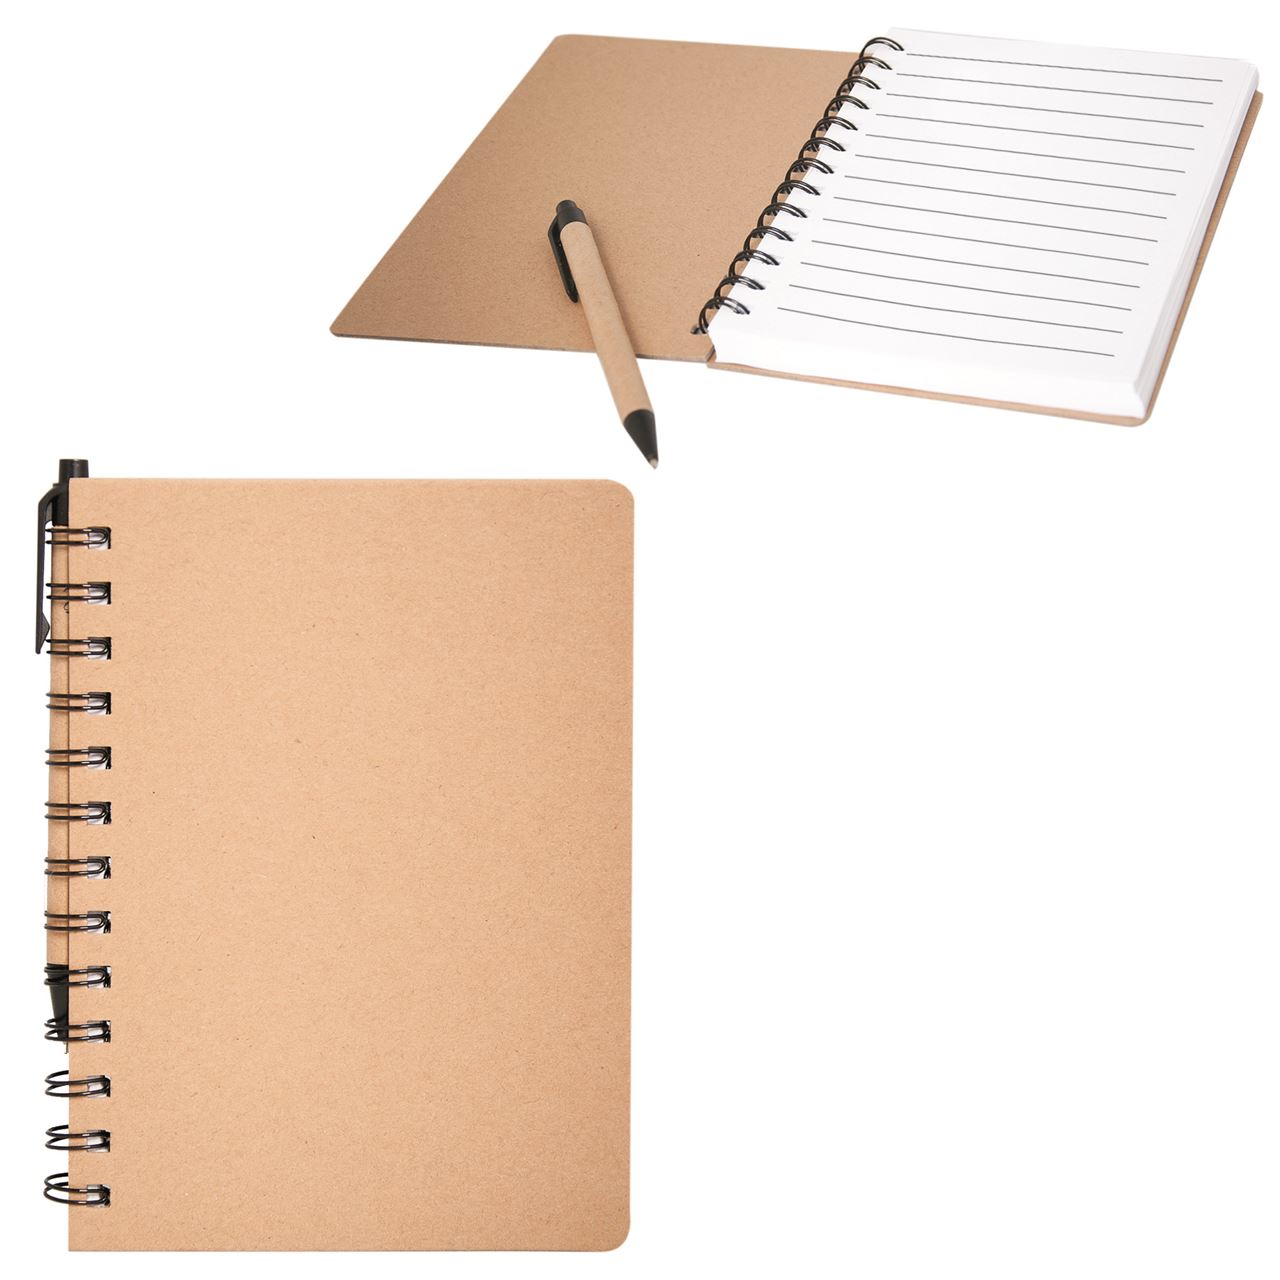 Picture of Recycled Cardboard Notebook